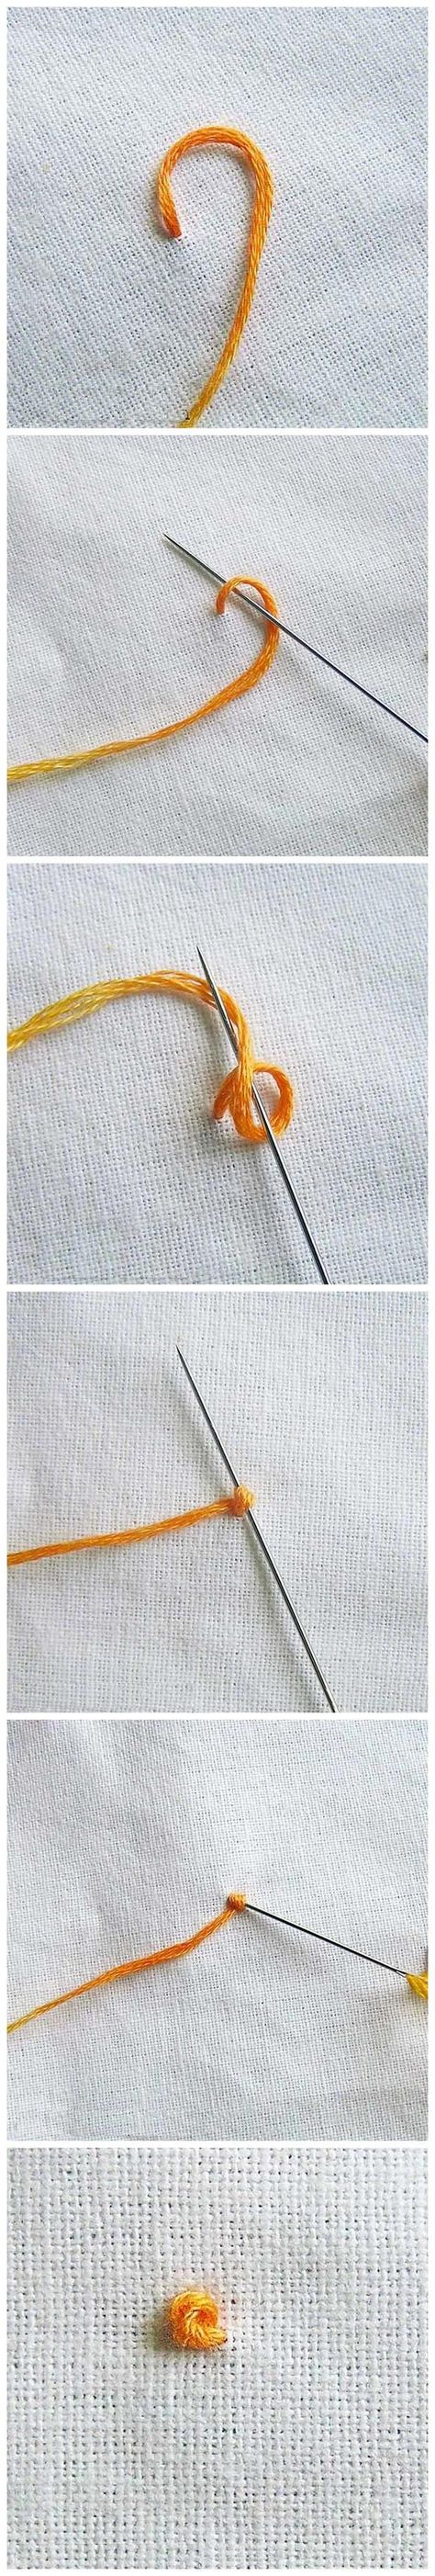 Get that French knot exactly where you want it. Colonial Stitch, French Notes Embroidery, Colonial Knot, 8 Knot, Knot Embroidery, Knot Tutorial, Sulaman Pita, Pola Bordir, 카드 디자인